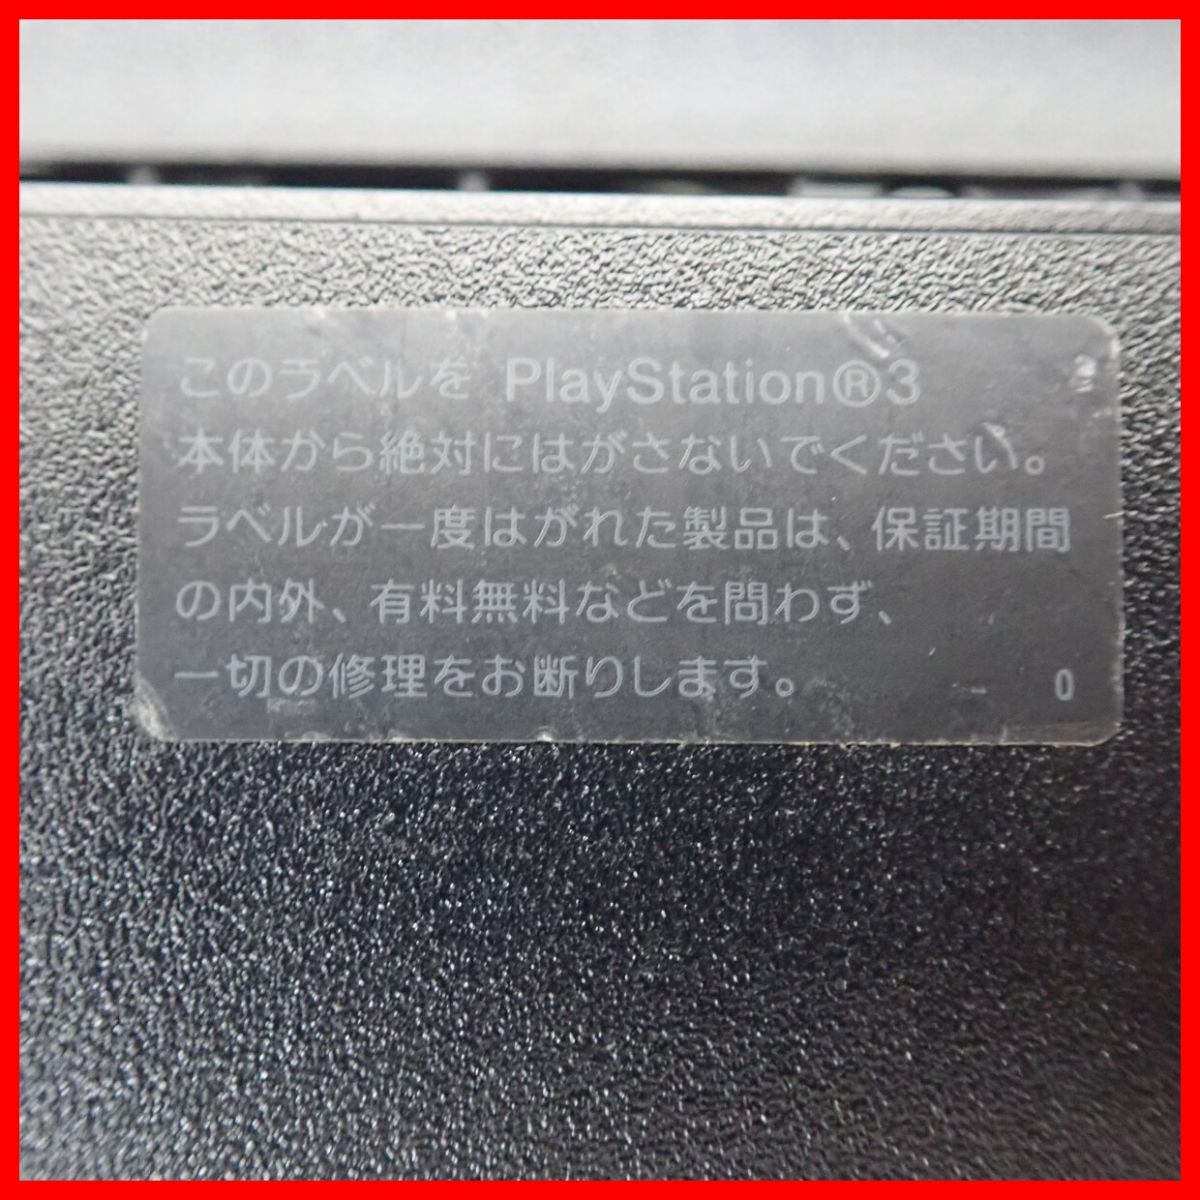  operation goods PS3 PlayStation 3 body only CECH-2000A/2000B/2500A/3000A charcoal * black together 4 pcs. set PlayStation3 SONY Sony [40